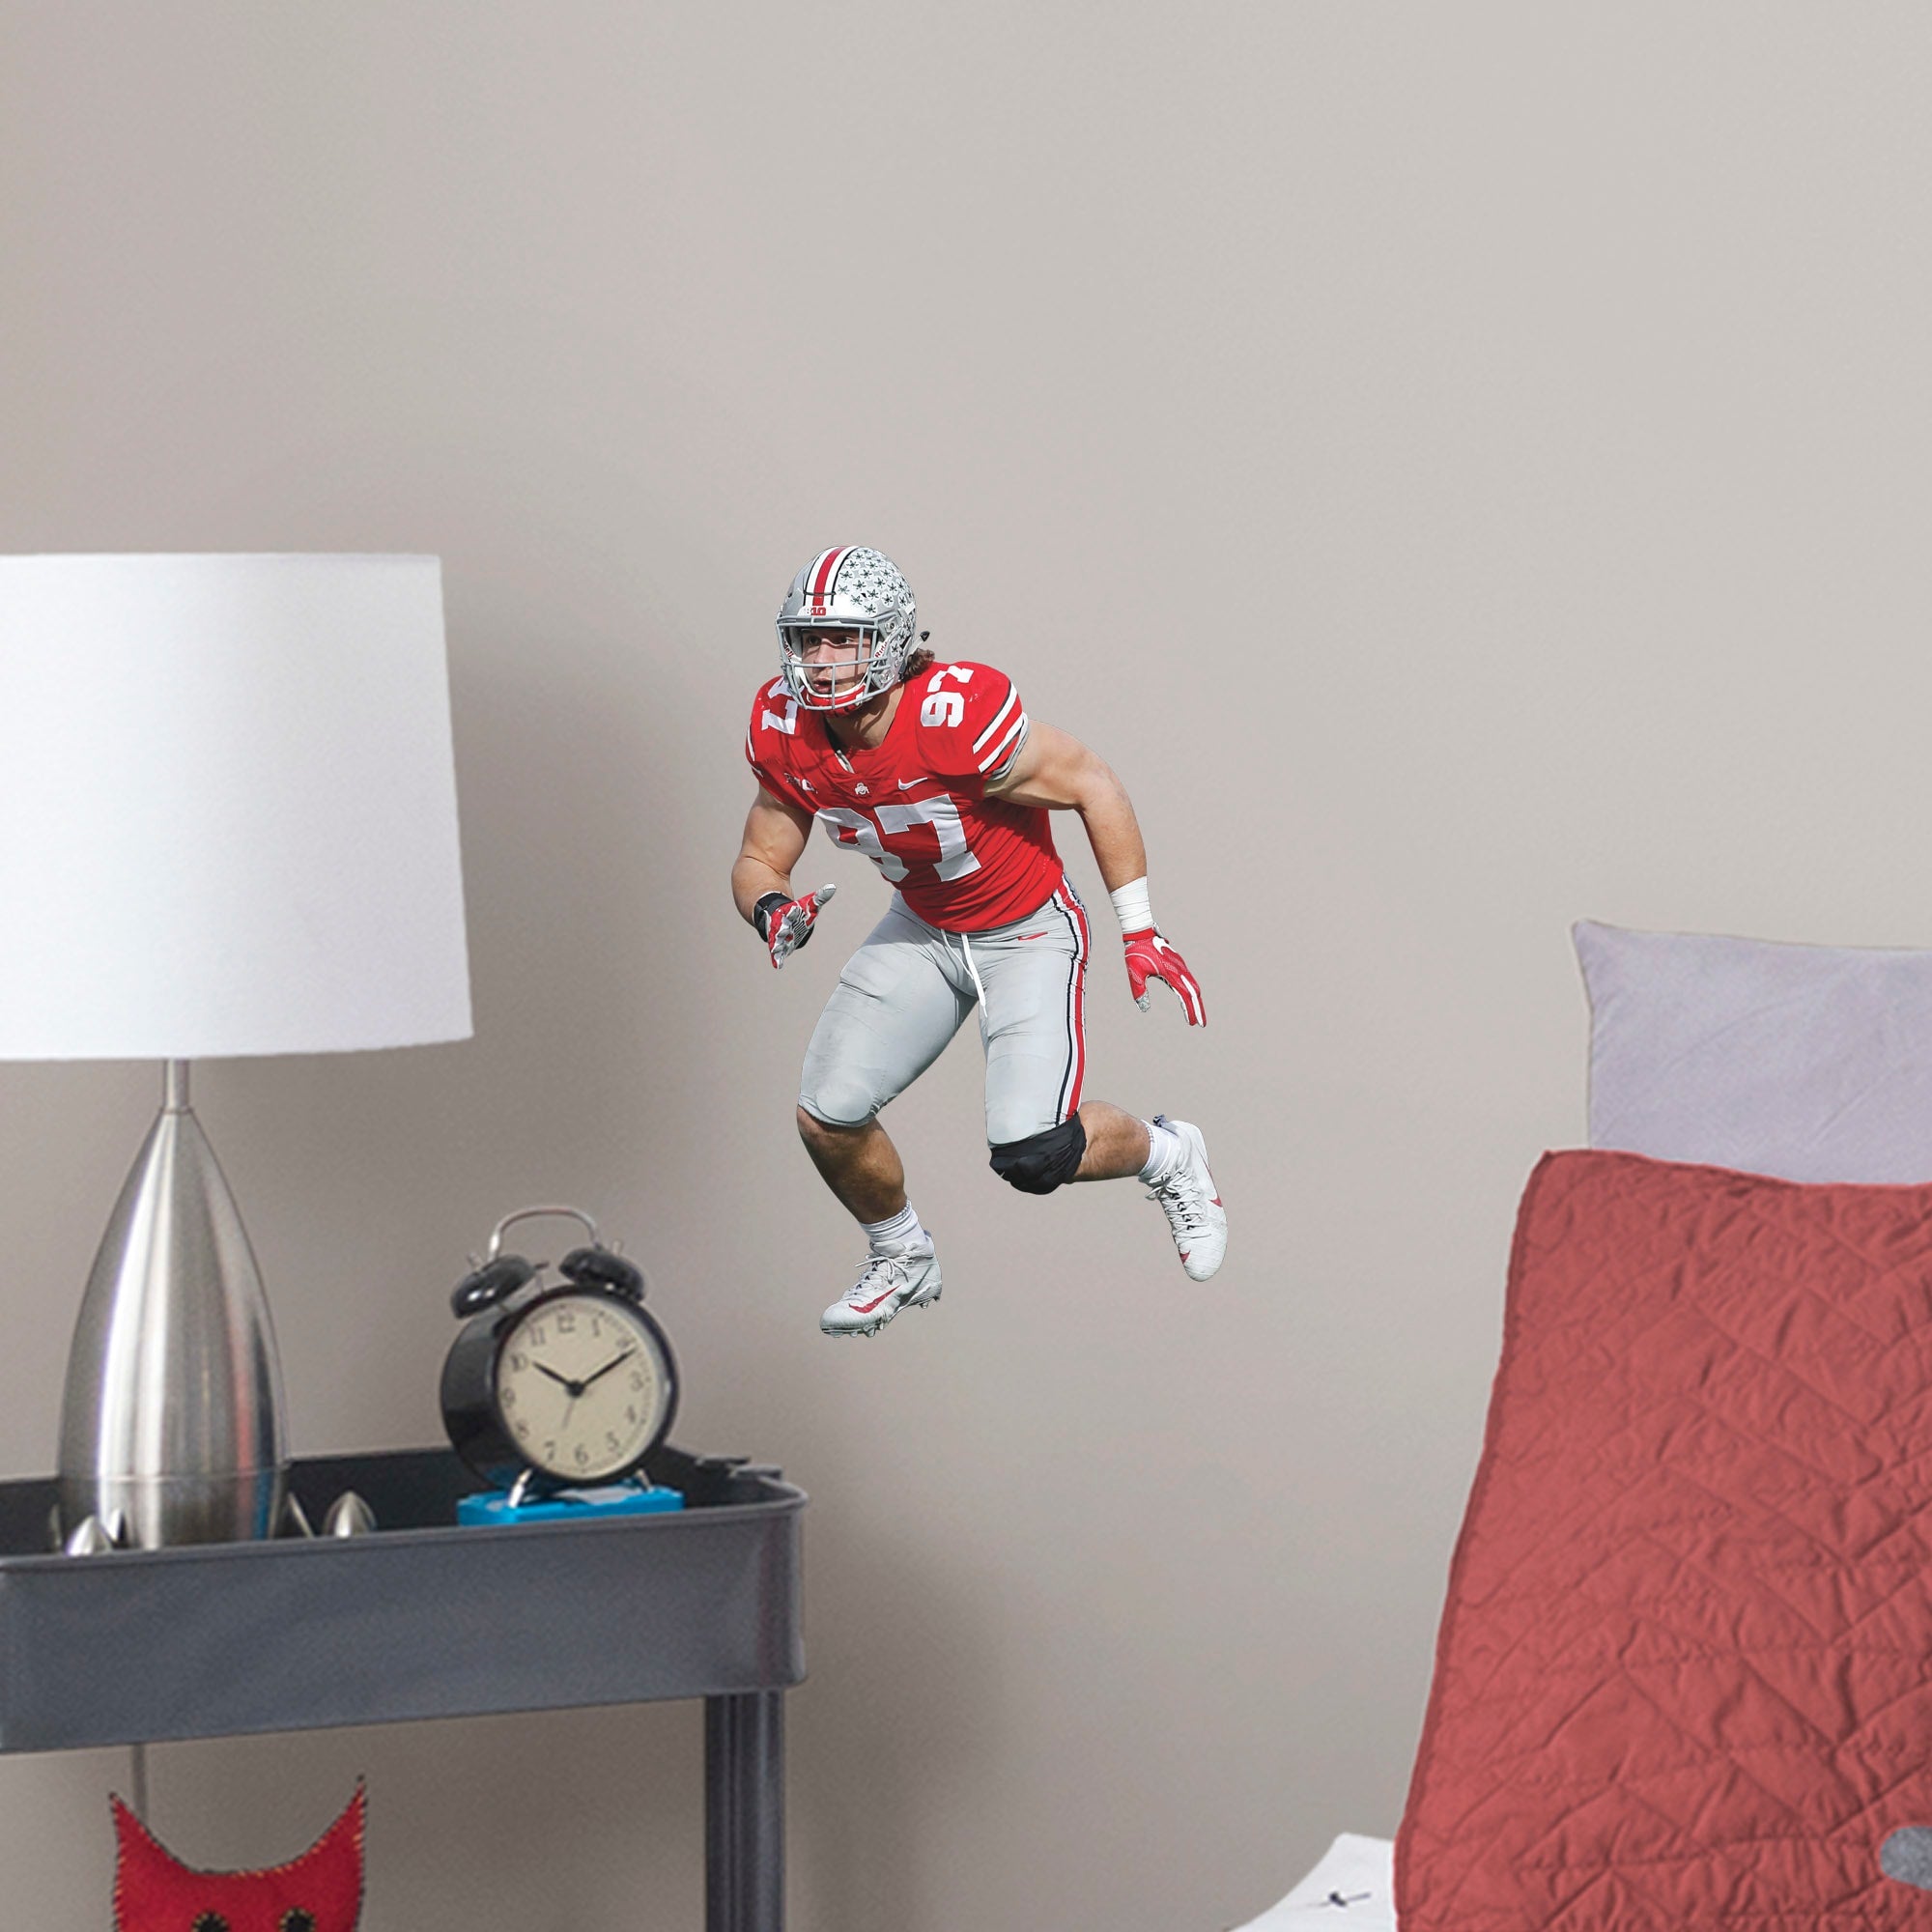 Nick Bosa for Ohio State Buckeyes: Ohio State - Officially Licensed Removable Wall Decal Large by Fathead | Vinyl